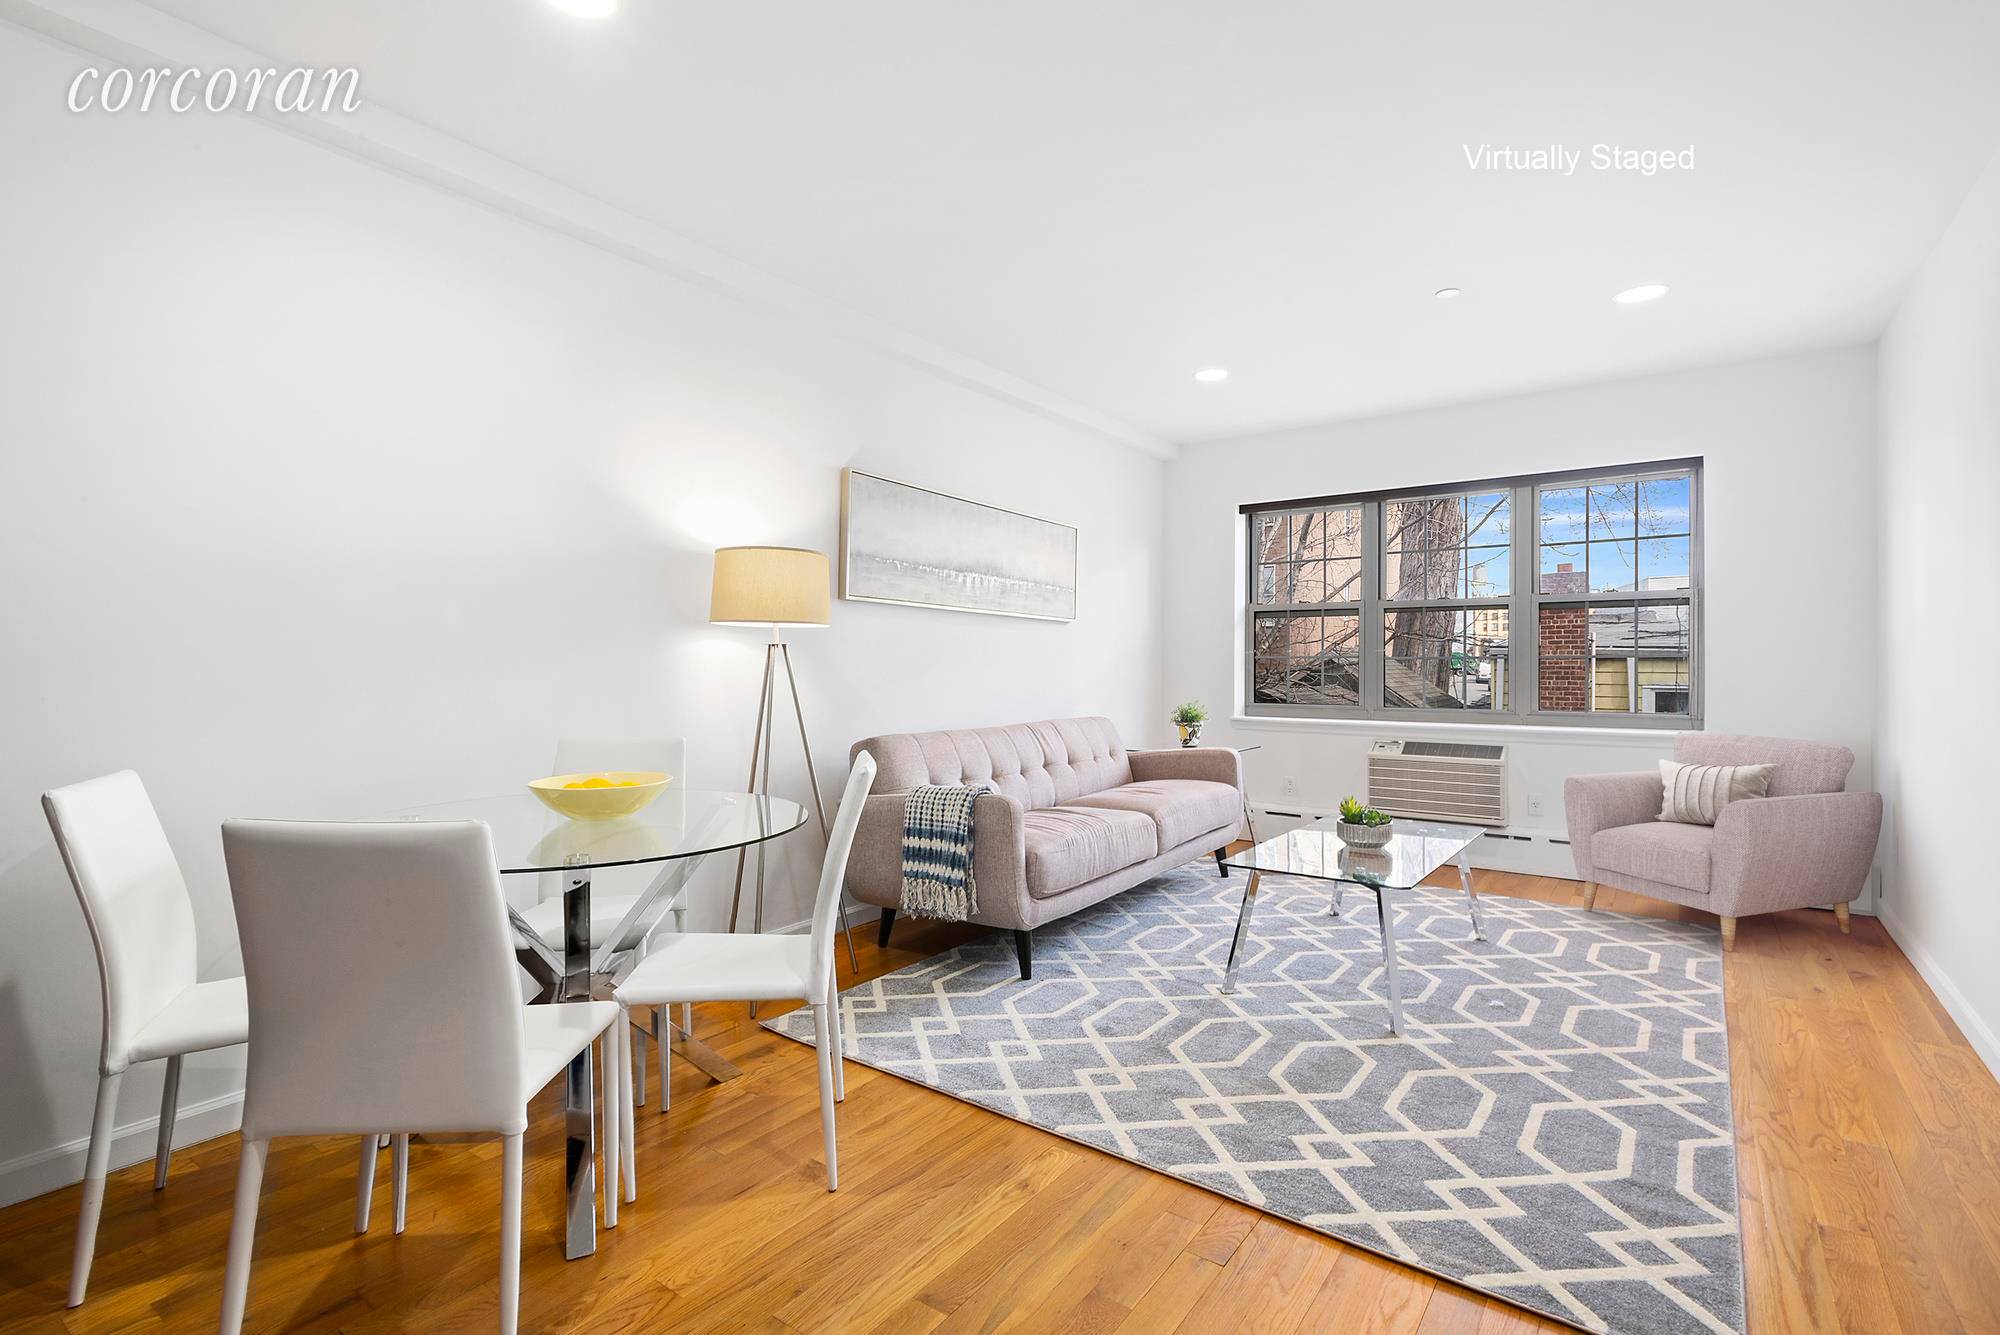 Super low monthlies ! Located on tree lined Monitor Street in East Williamsburg this spacious one bedroom condo is just one flight up and streams eastern sunlight all day long.